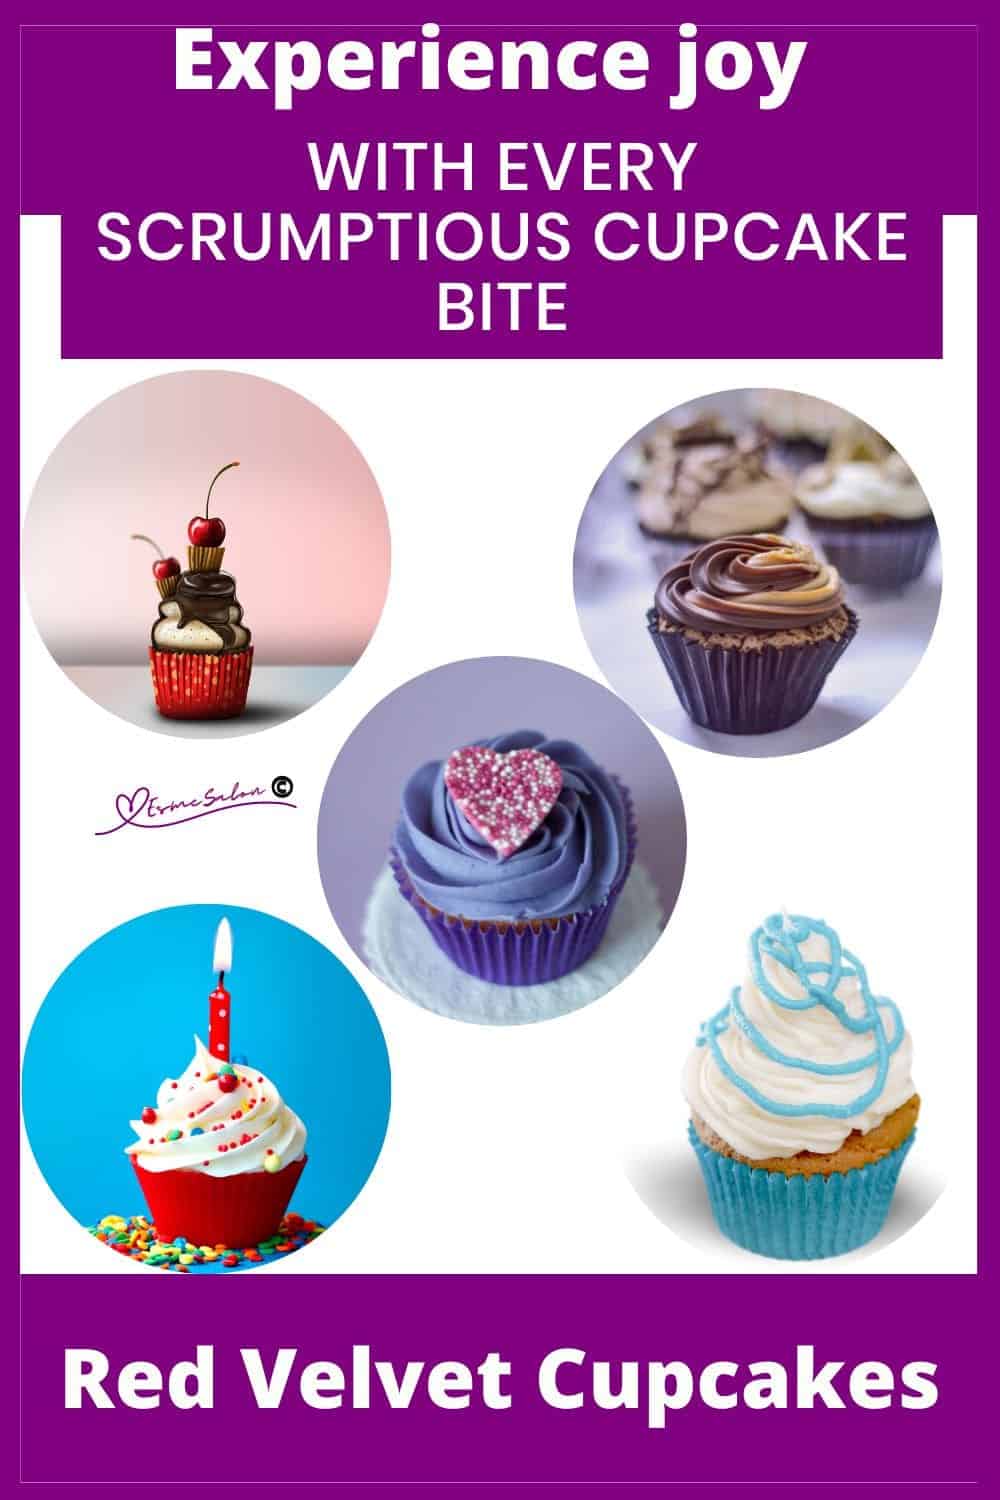 an image of various cupcakes as treats for any occasion